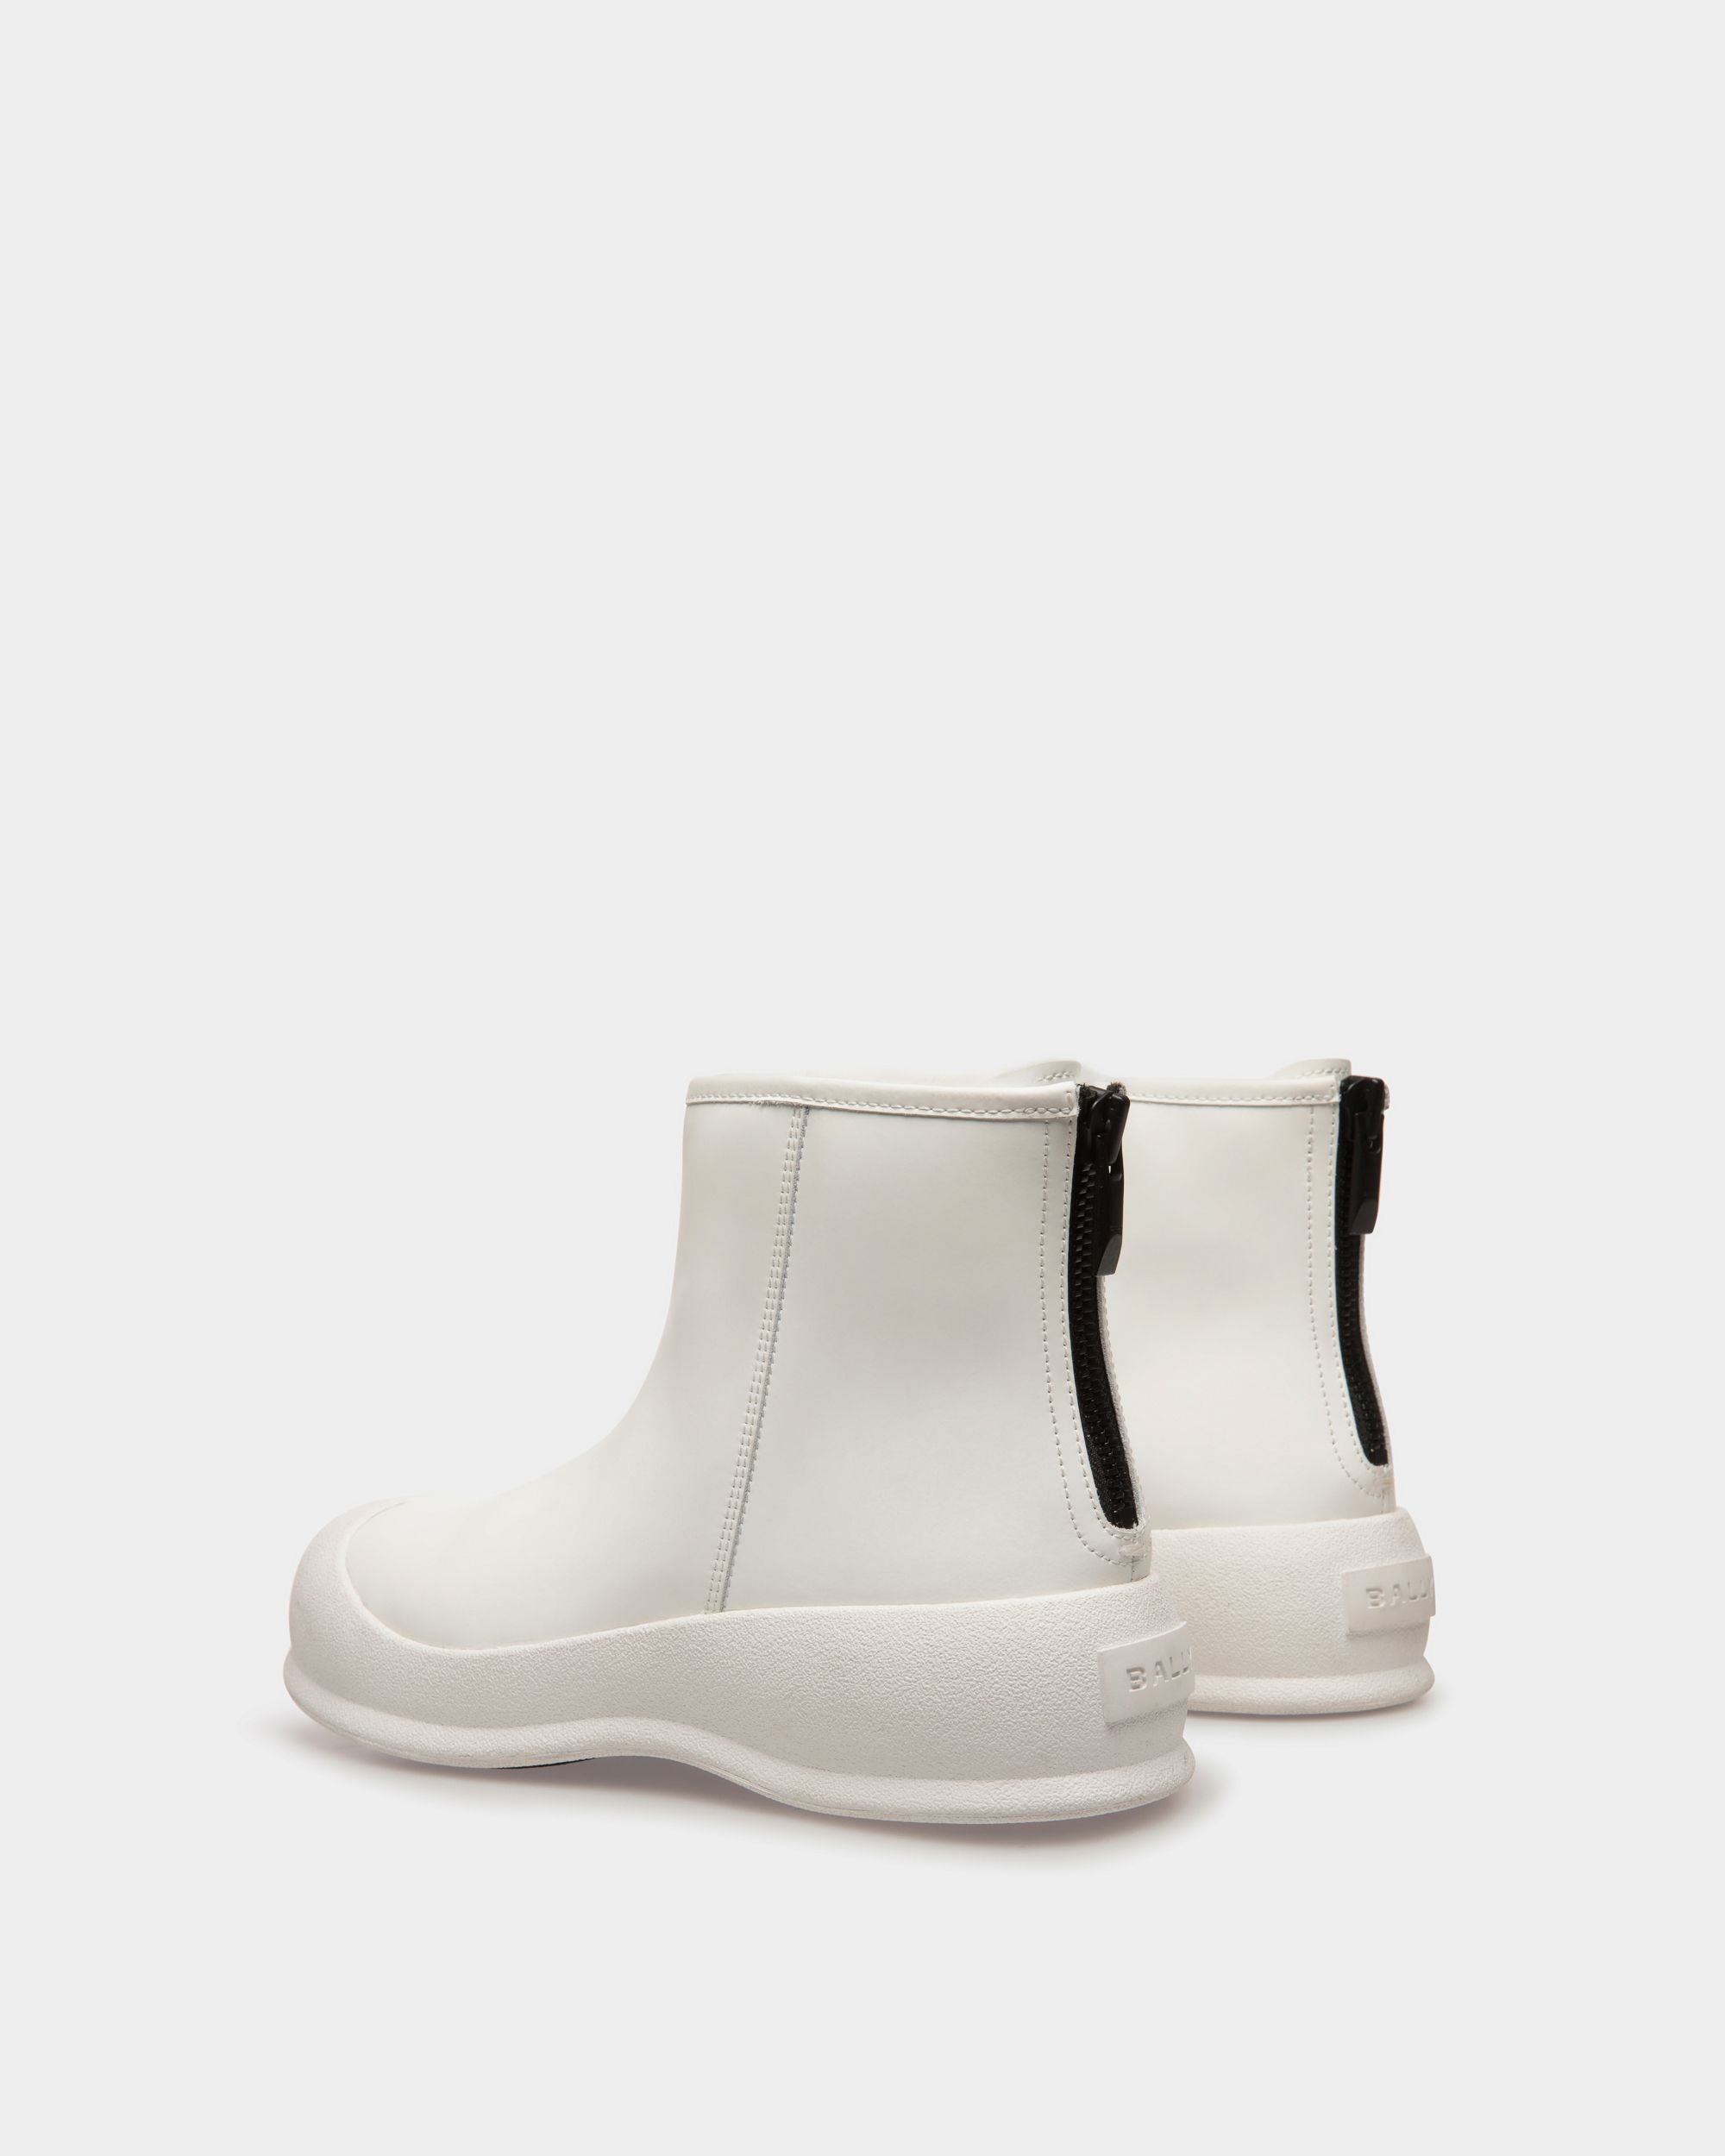 Carsey | Women's Booties | White Rubber-coated Leather | Bally | Still Life 3/4 Back